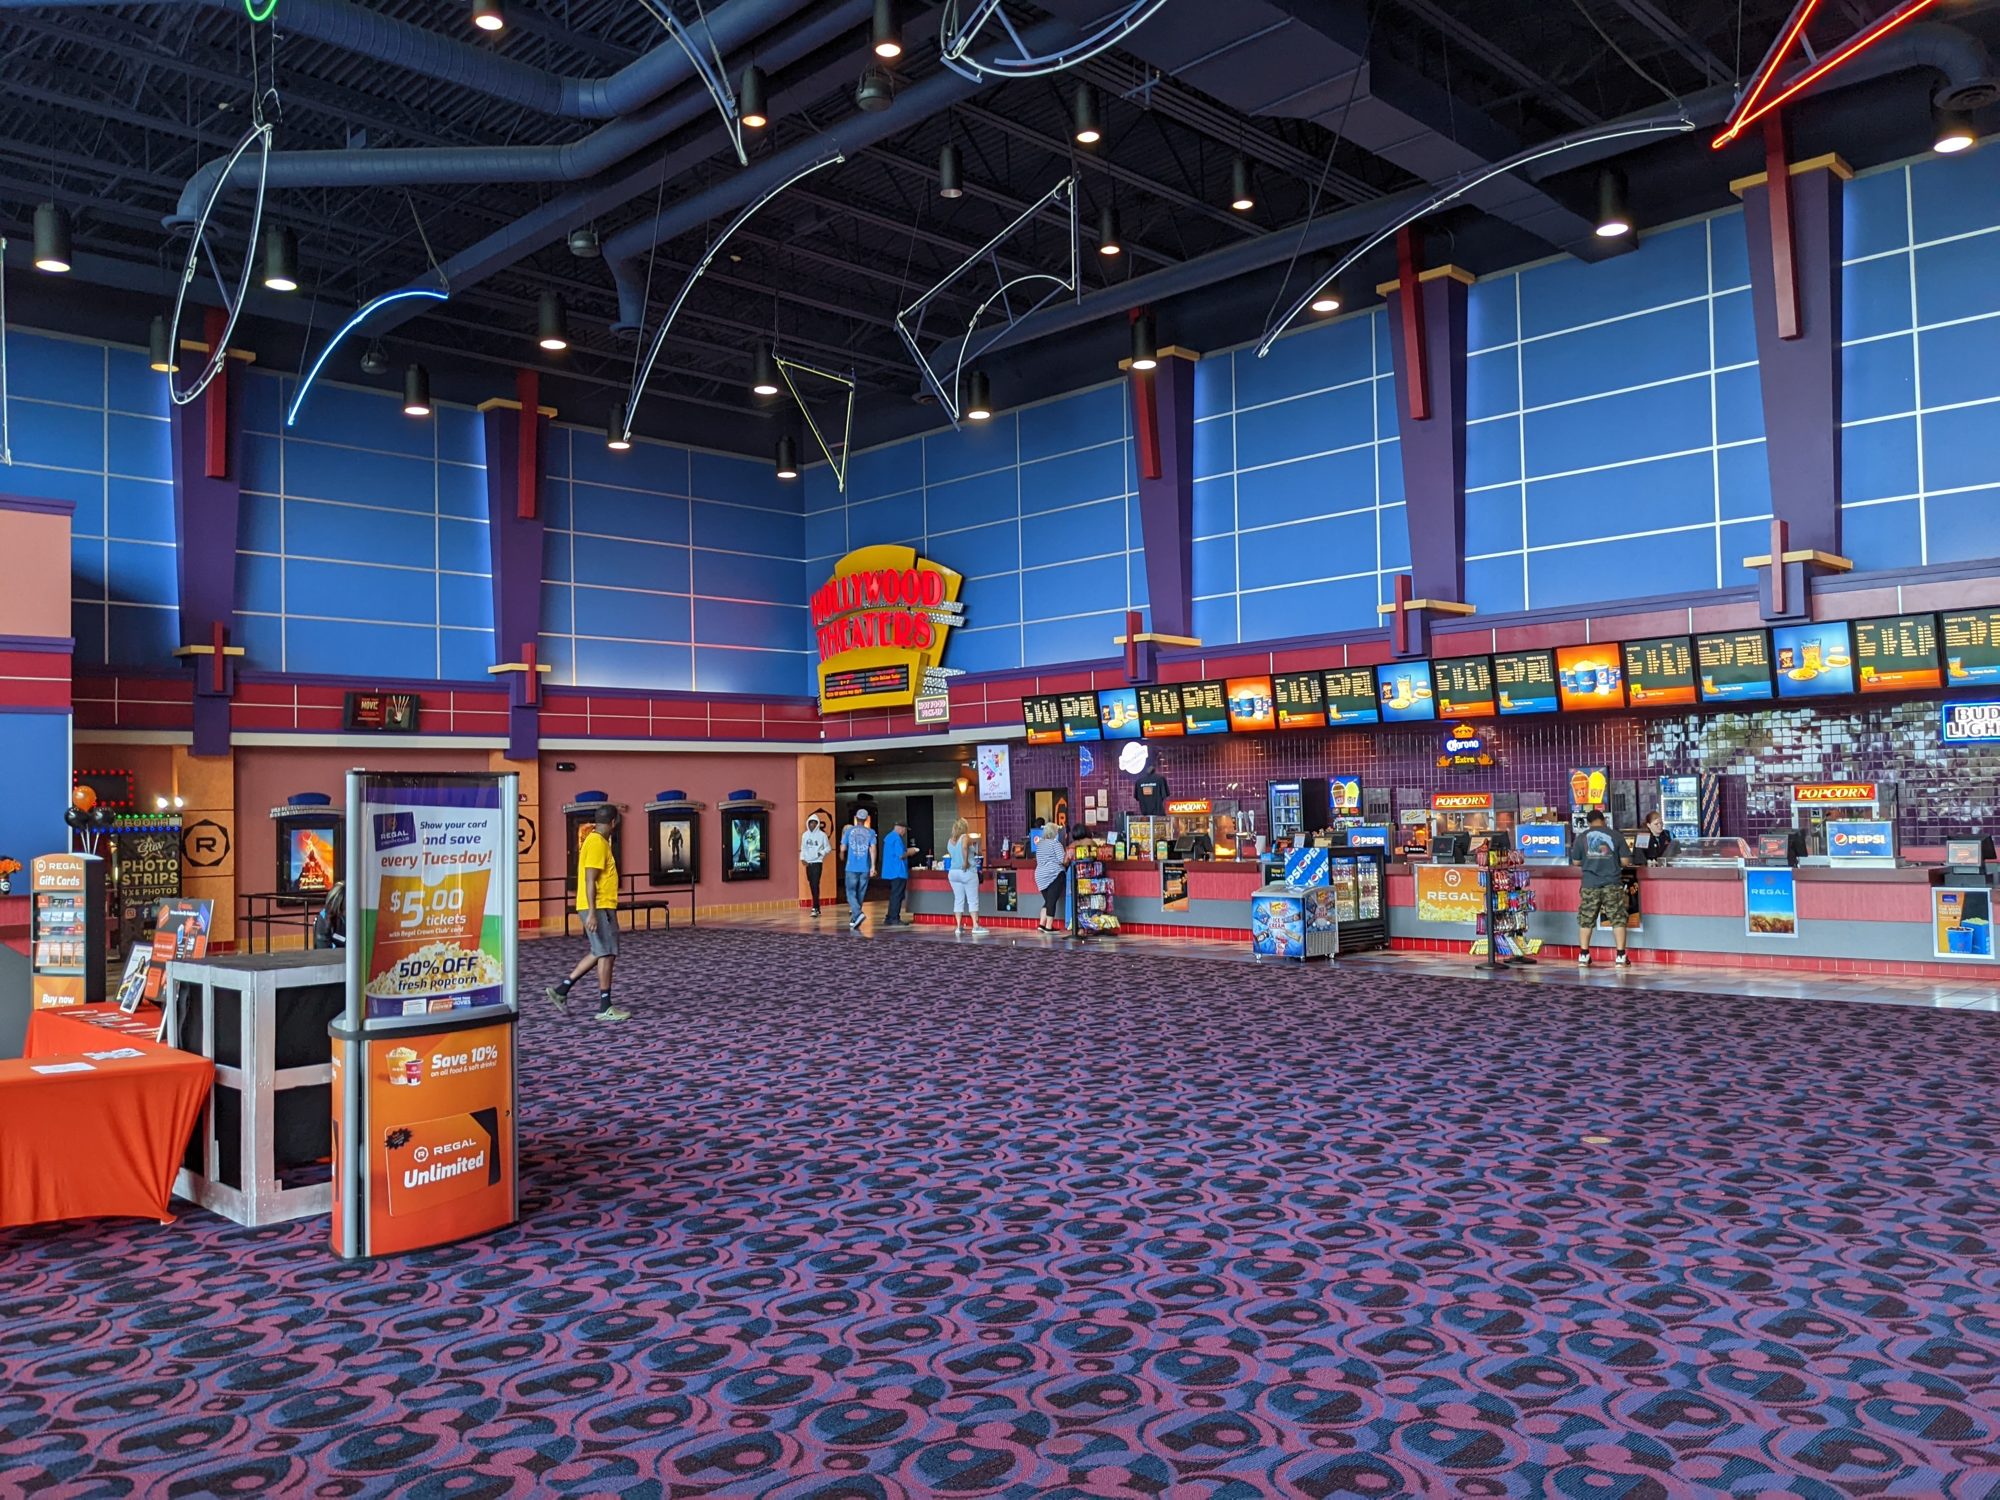 The Regal Cinemas remains open. A BJ’s Wholesale Club is planned to replace it.